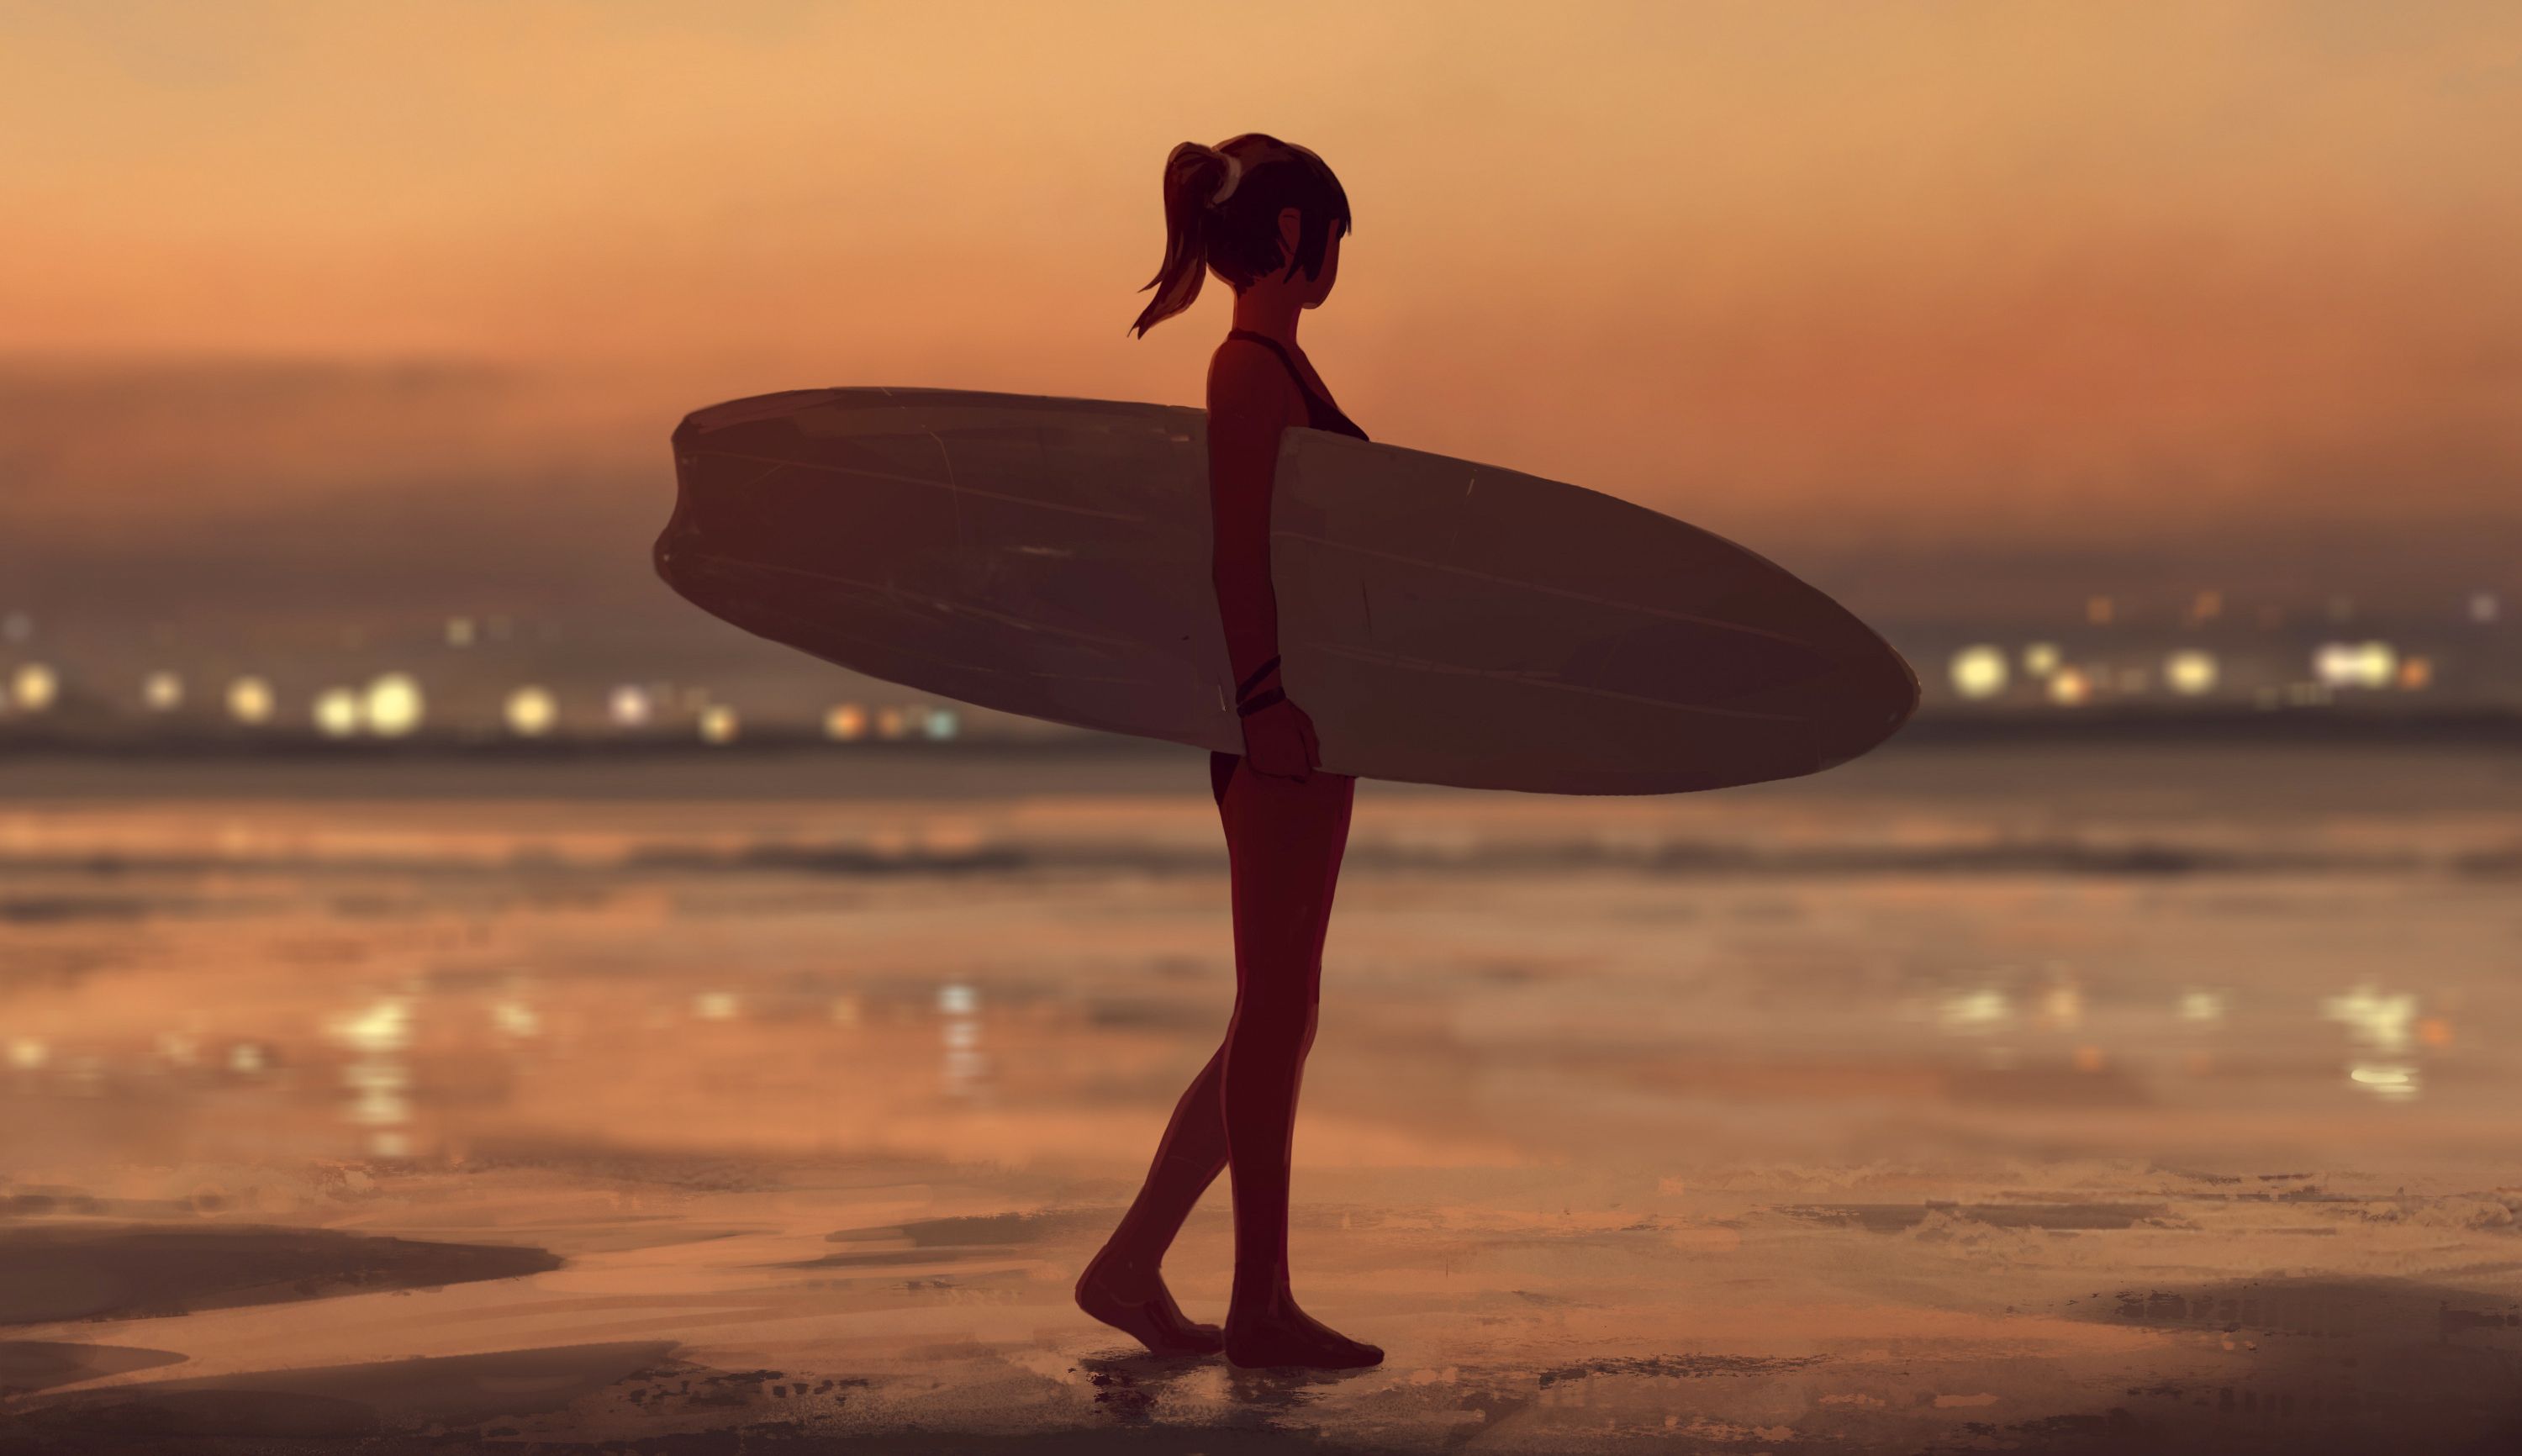 A woman with a surfboard on the beach - Surf